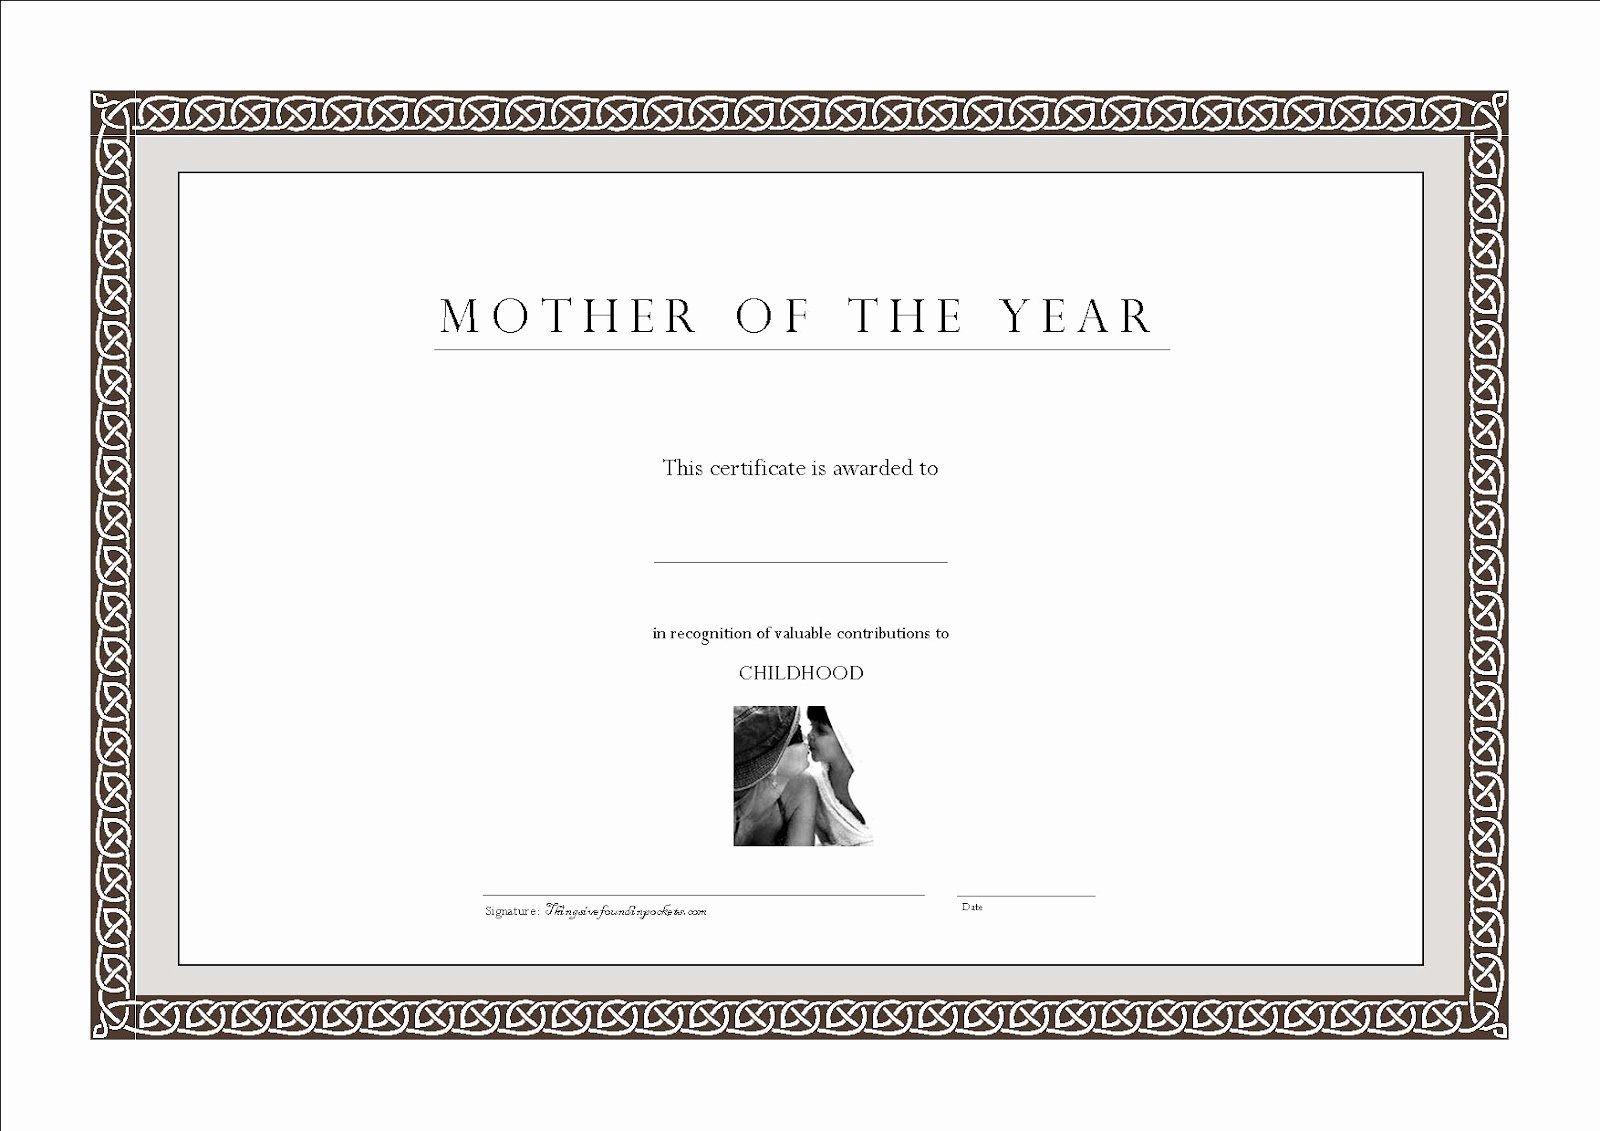 Mother Of the Year Certificate Awesome Things I Ve Found In Pockets Mother Of the Year Certificate